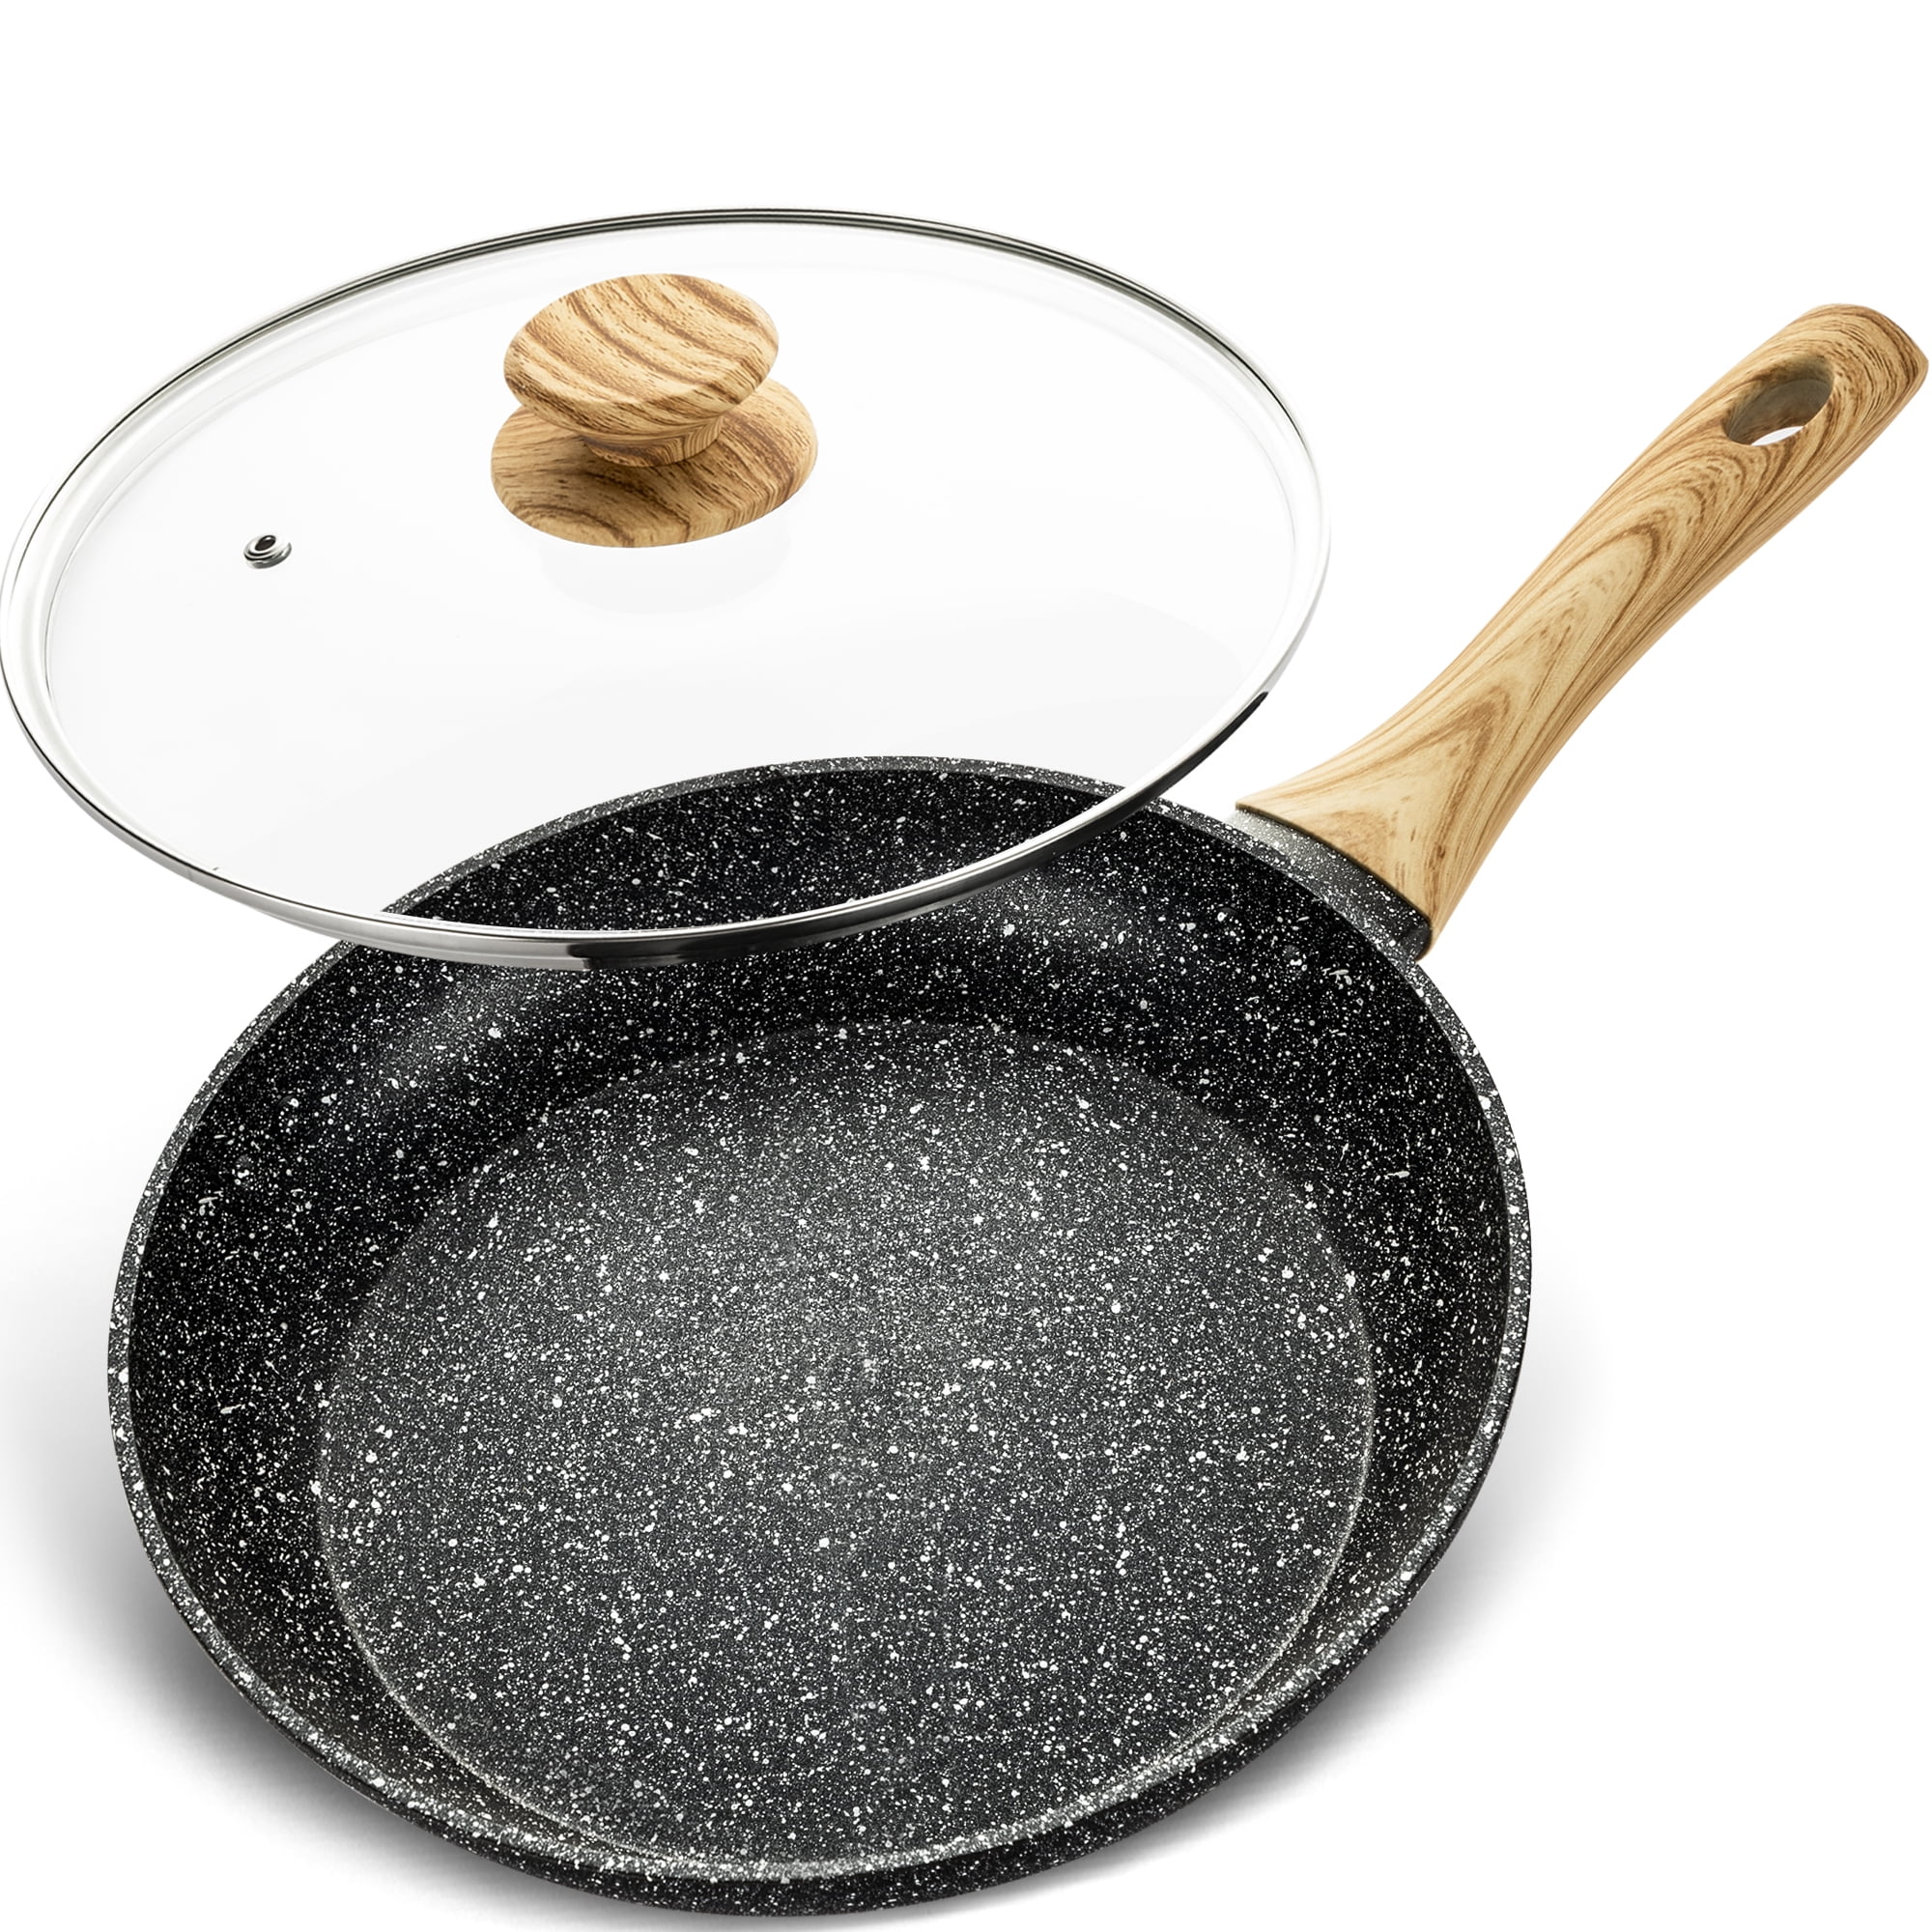  MICHELANGELO Nonstick Wok with Lid, Hard Anodized Wok